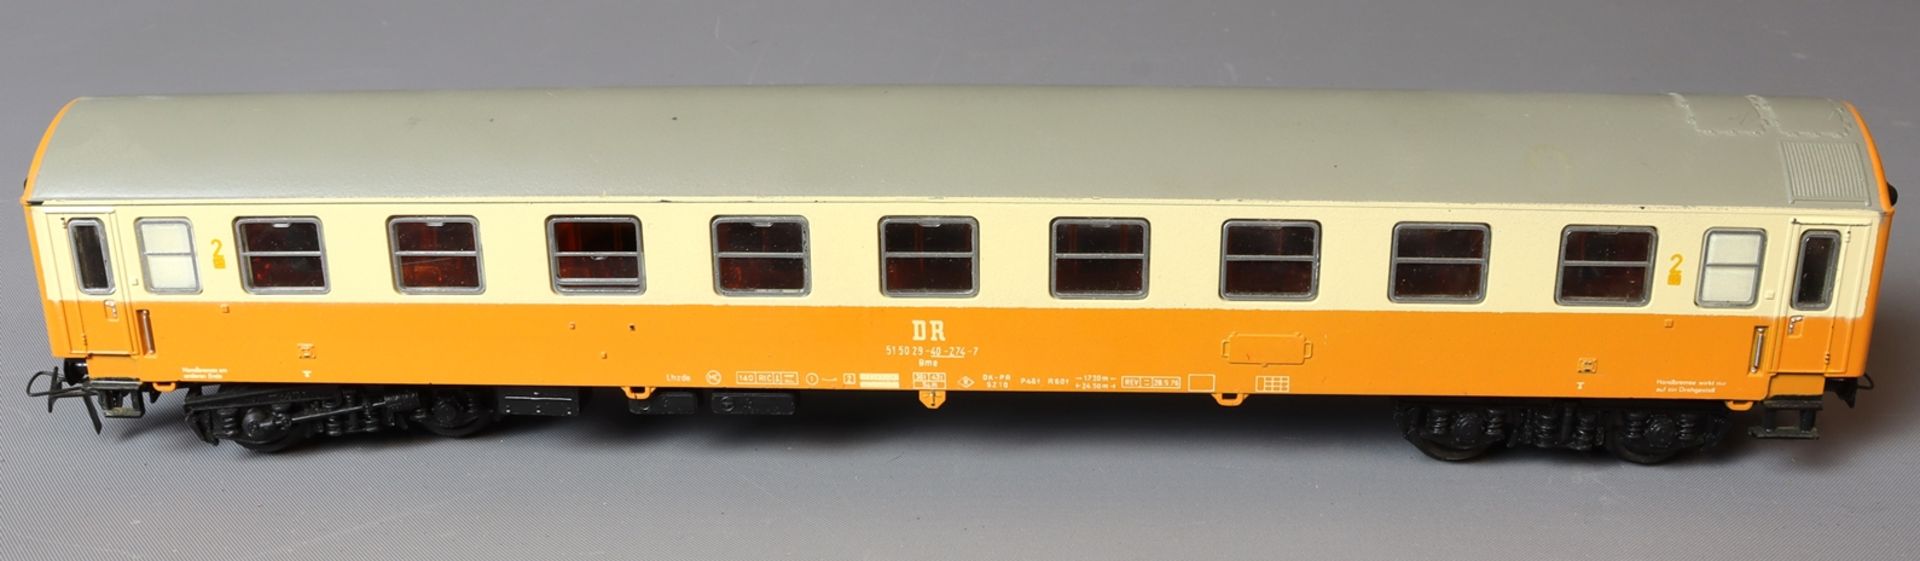 PIKO wagon 51 50 29 - 40- 274-7, city express, second half of the 20th century, German